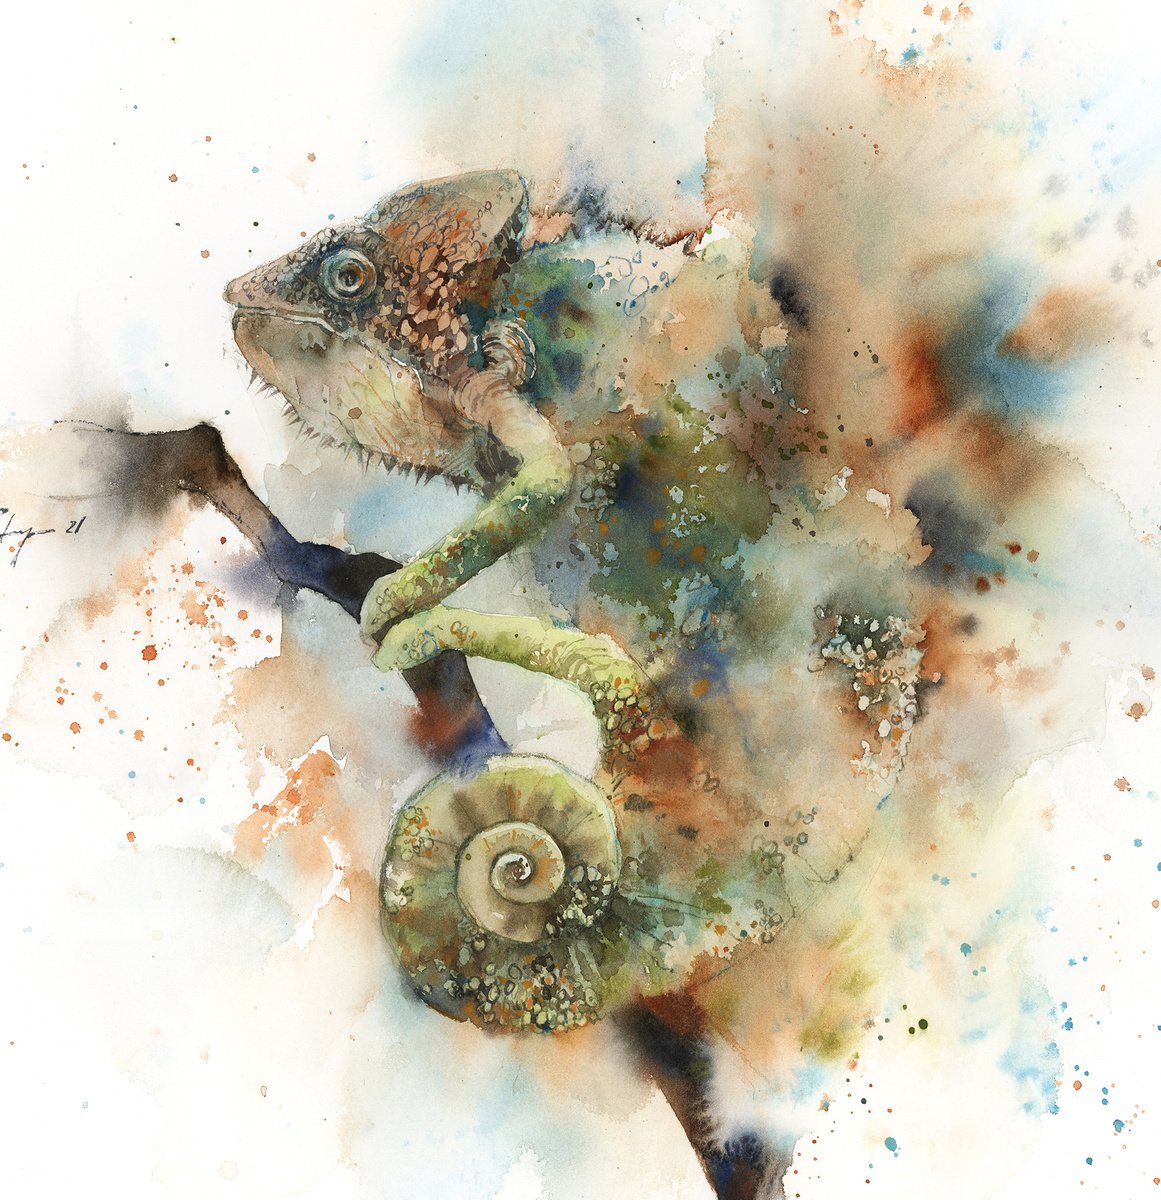 Chameleon Original Watercolor Painting by Sophie Rodionov